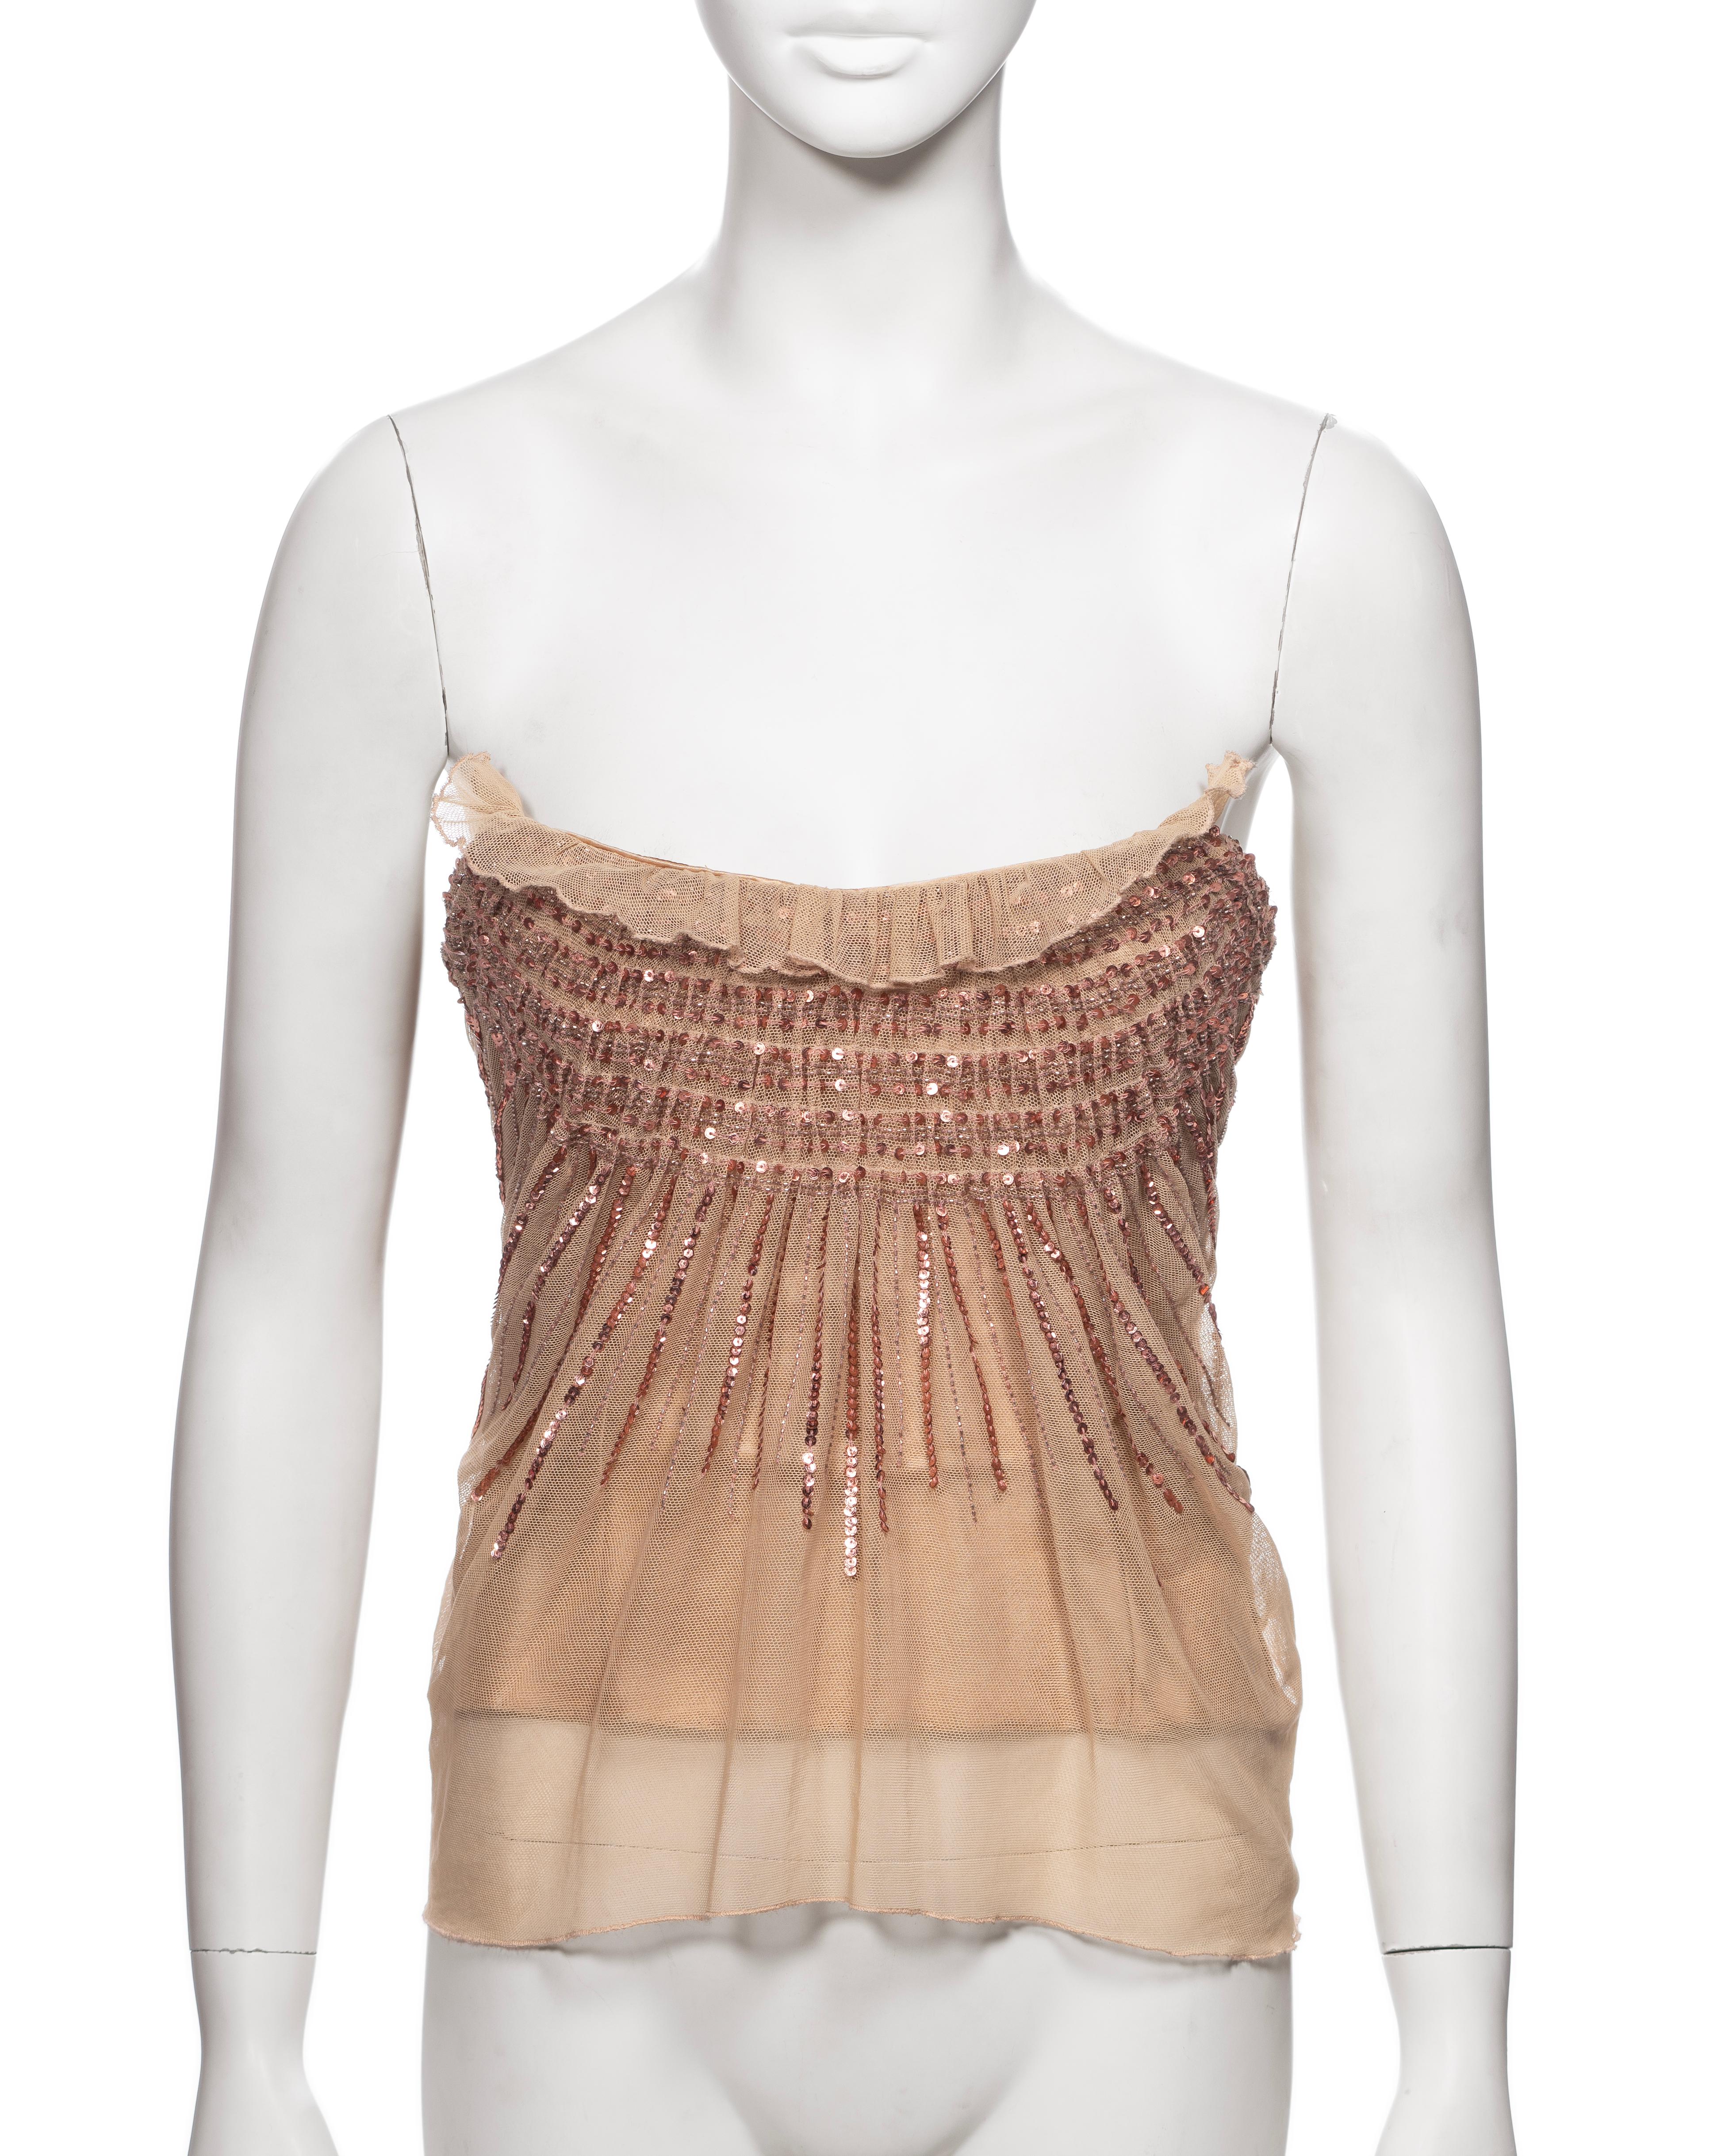 Christian Dior by John Galliano Nude Smocked Mesh and Sequin Corset Top, FW 2005 For Sale 1